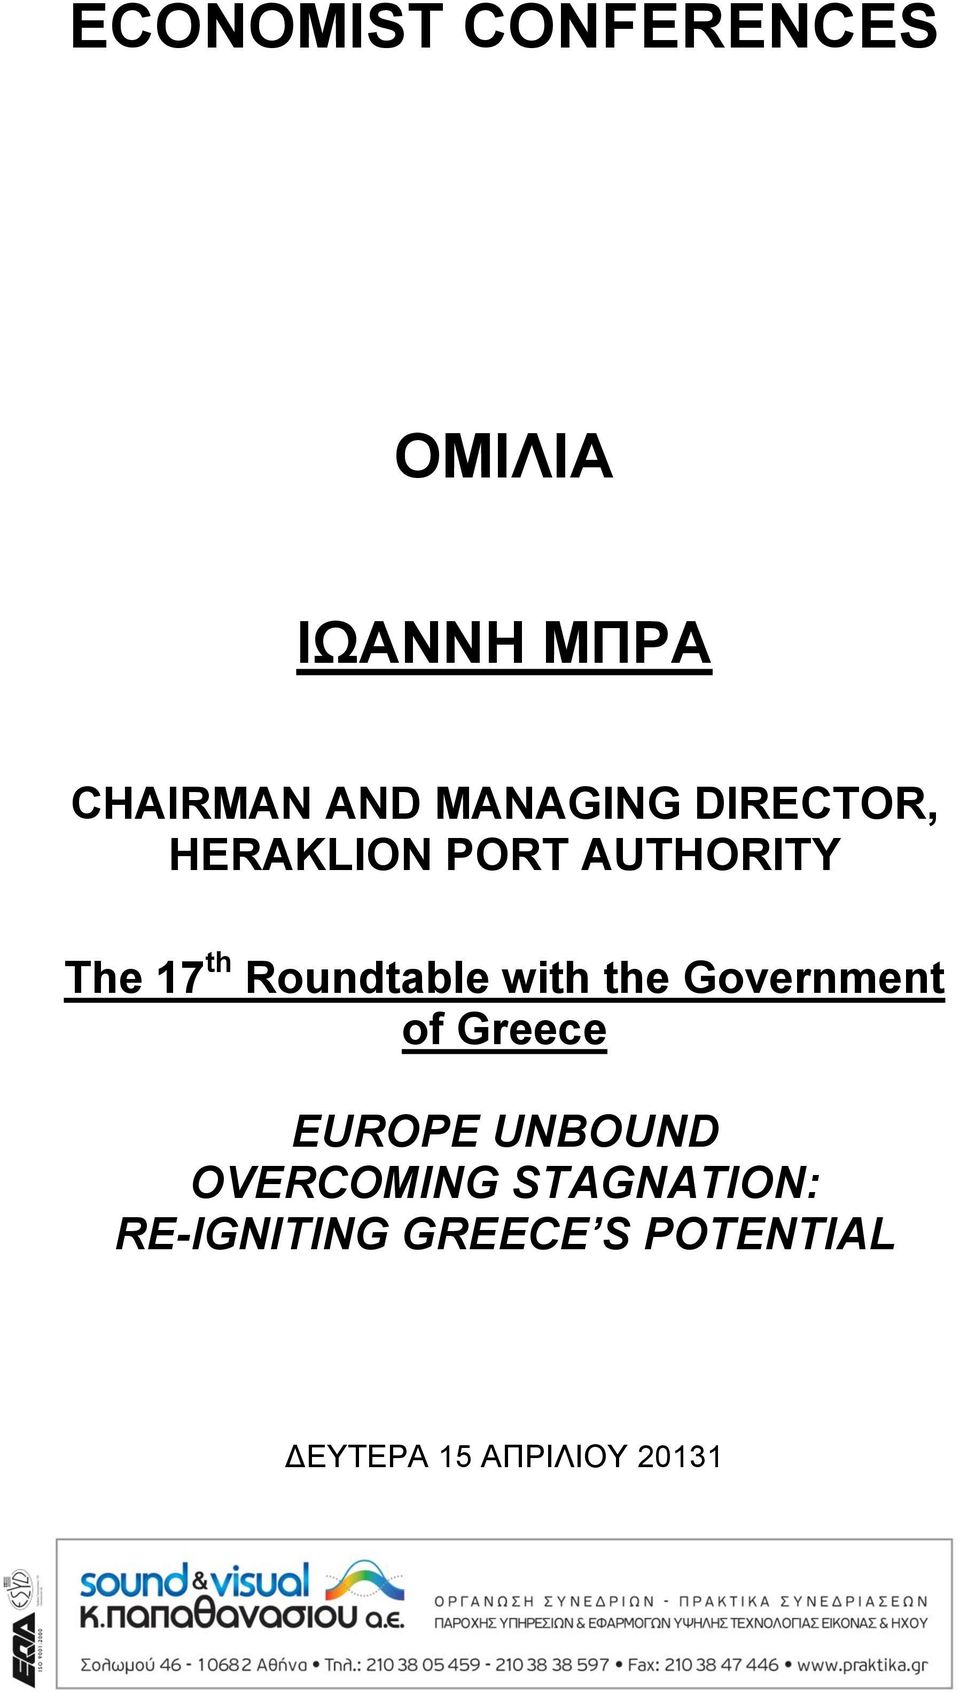 Roundtable with the Government of Greece EUROPE UNBOUND